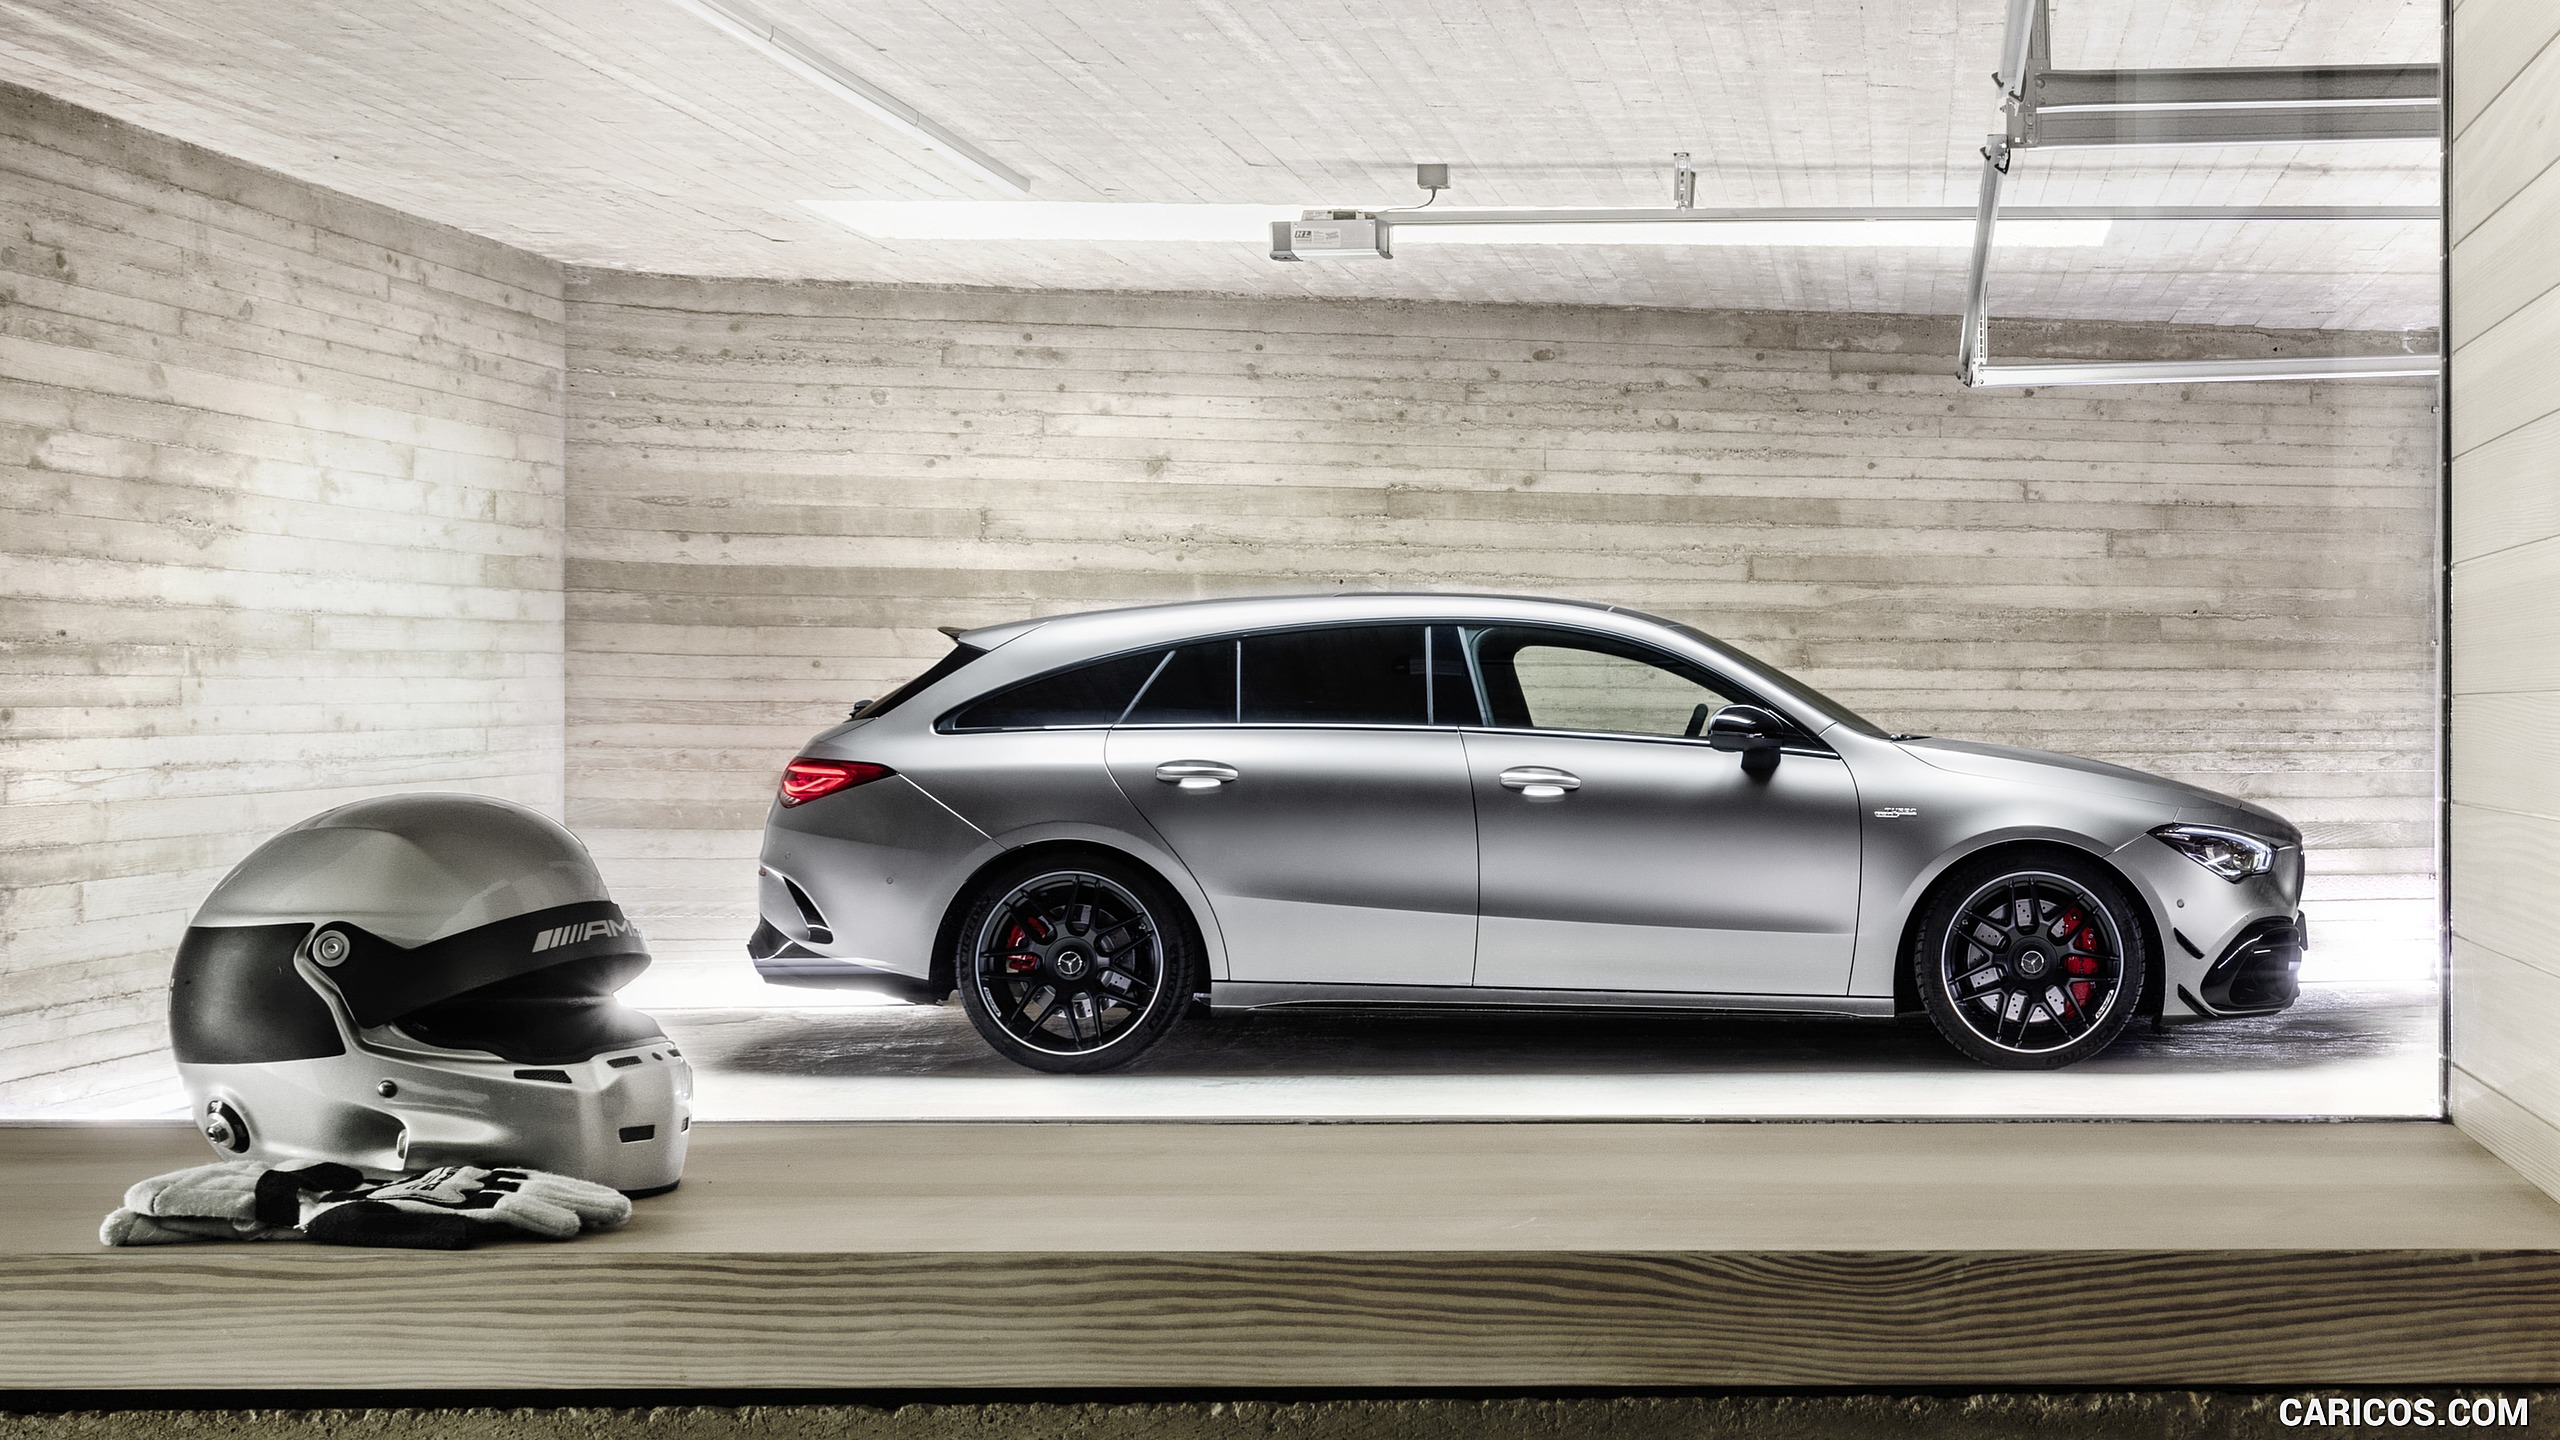 2020 Mercedes-AMG CLA 45 S 4MATIC+ Shooting Brake - Side, #24 of 35